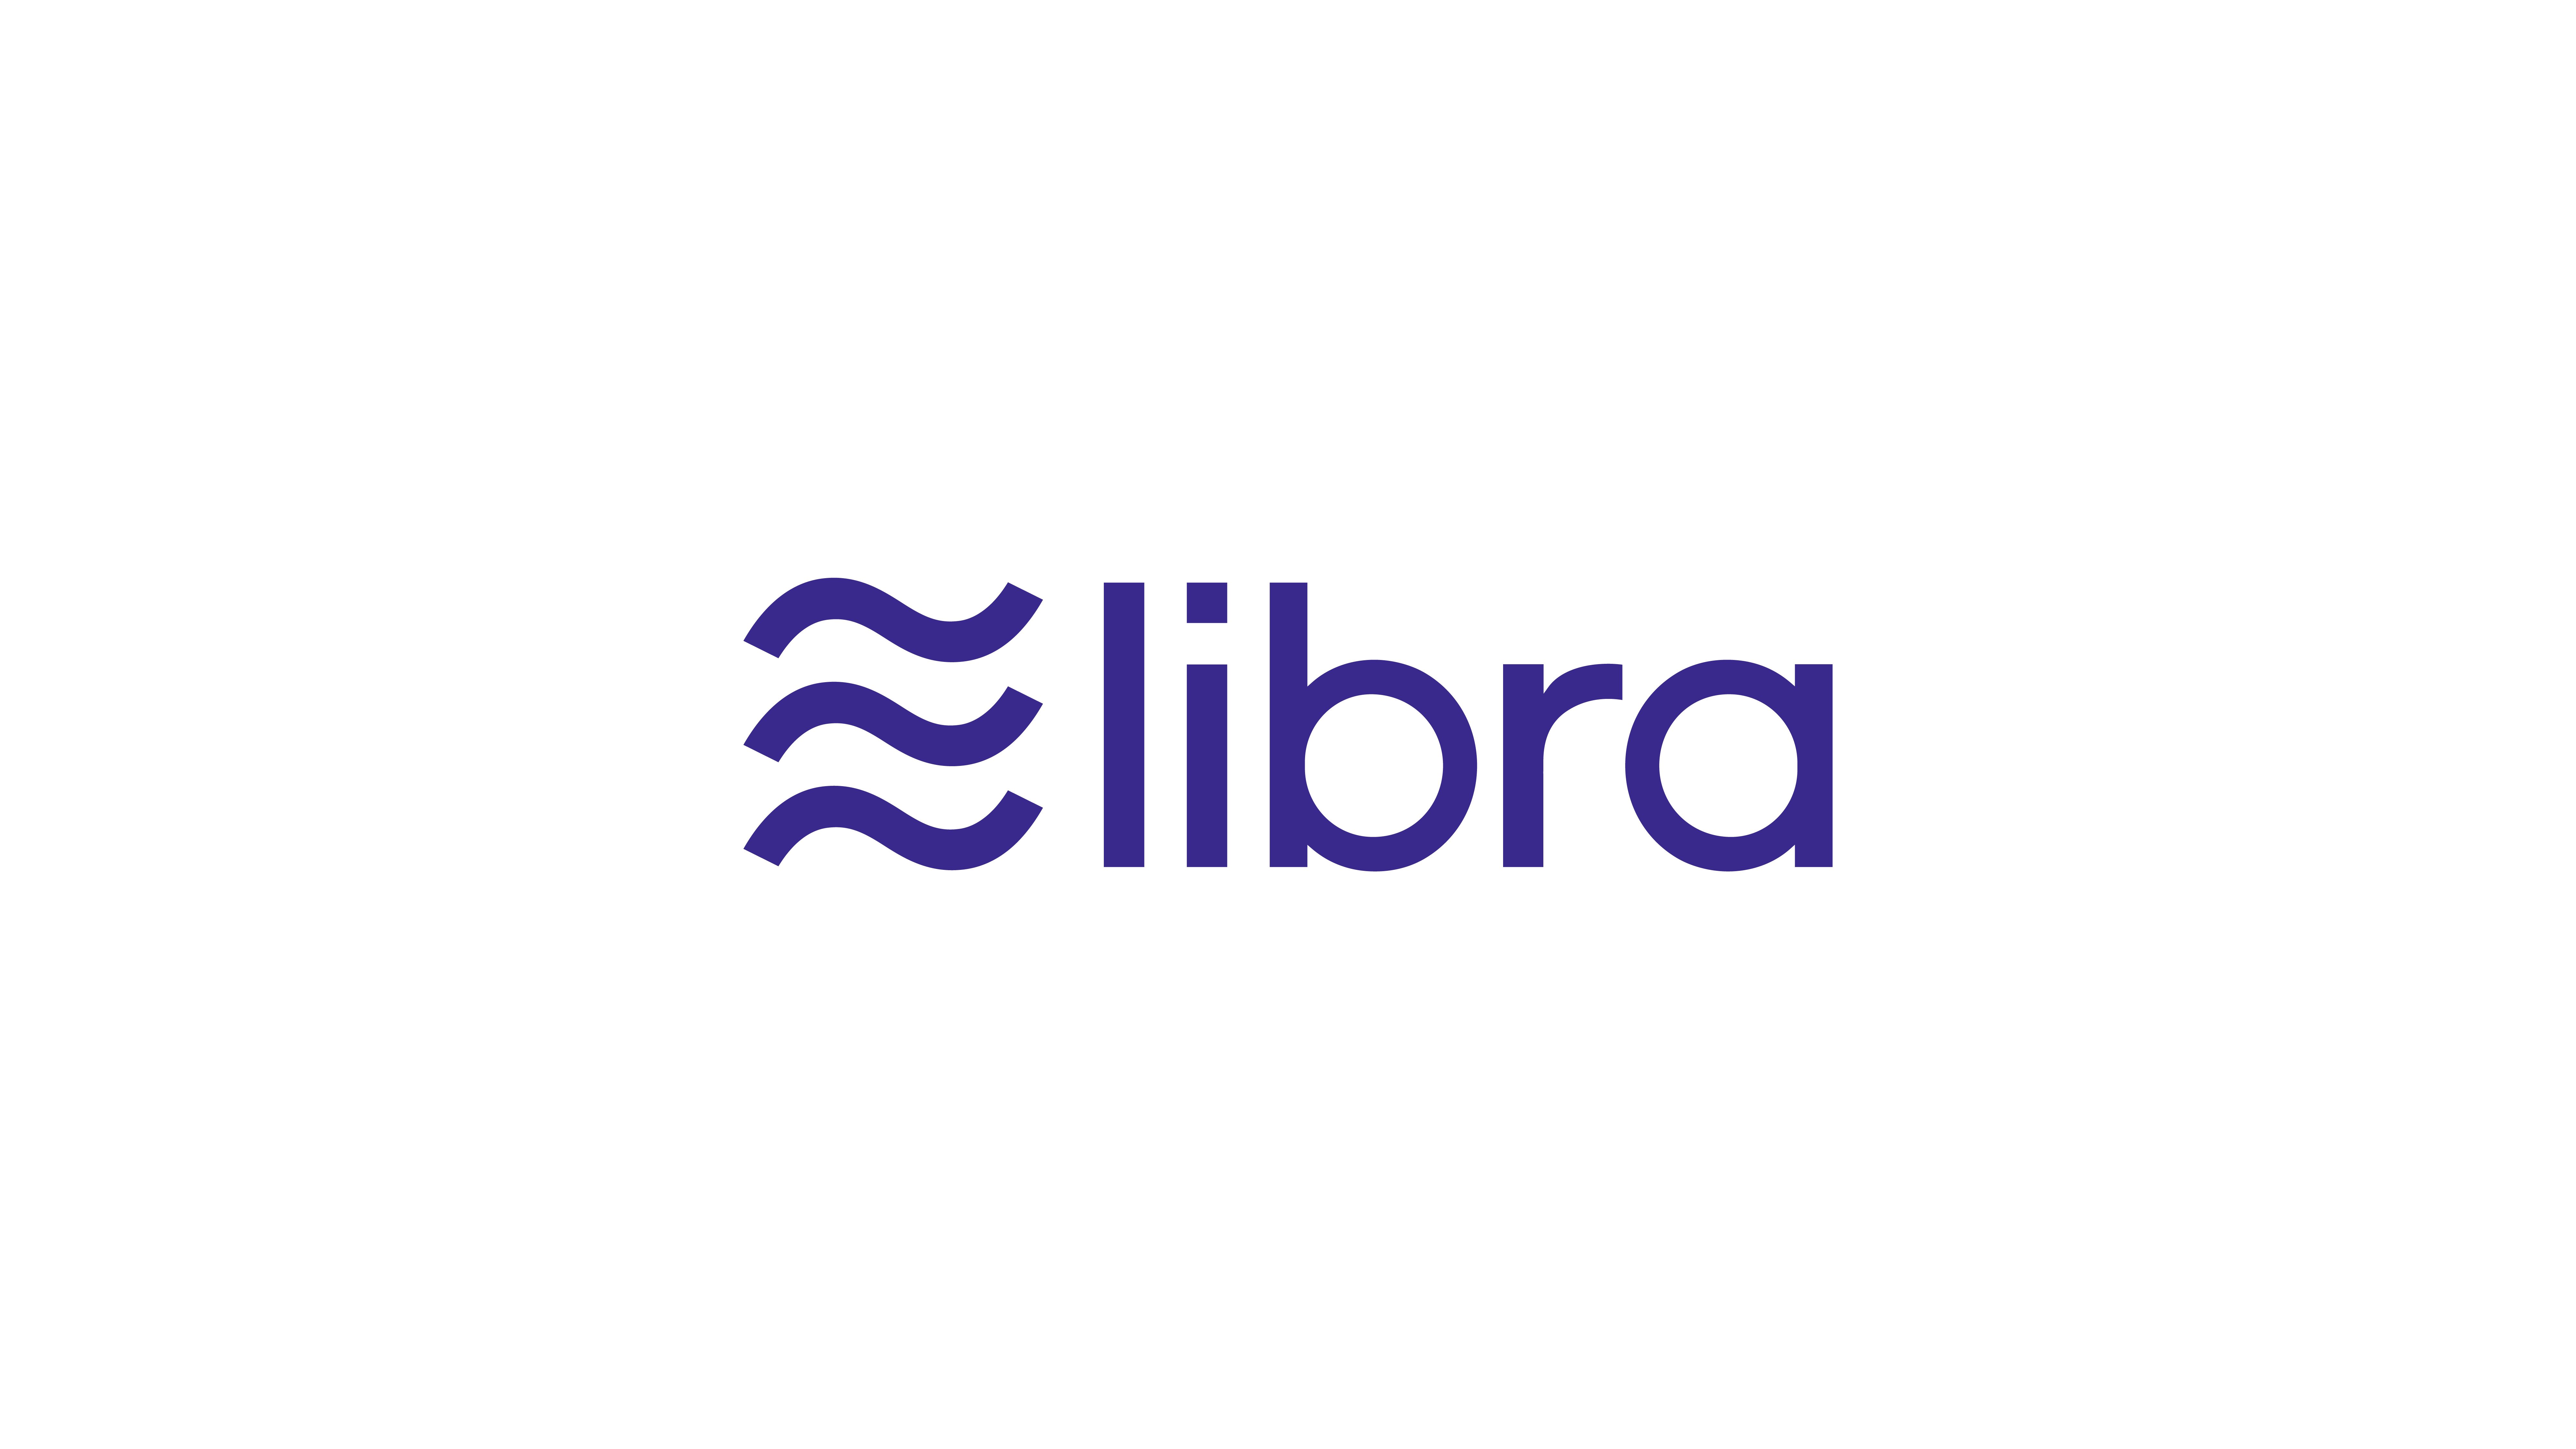 This undated image obtained June 17, 2019 courtesy of Libra Press shows the logo graphic for Libra. - Facebook is leaping into the world of cryptocurrency with its own digital money, designed to let people save, send or spend money as easily as firing off text messages."Libra" -- described as "a new global currency" -- was unveiled June 18, 2019 in a new initiative in payments for the world's biggest social network with the potential to bring crypto-money out of the shadows and into the mainstream. Facebook and an array of partners released a prototype of Libra as an open source code to be used by developers interested in weaving it into apps, services or businesses ahead of a rollout as global digital money next year. (Photo by Handout / Libra Press / AFP) / RESTRICTED TO EDITORIAL USE - MANDATORY CREDIT "AFP PHOTO / LIBRA PRESS TEAM/HANDOUT" - NO MARKETING - NO ADVERTISING CAMPAIGNS - DISTRIBUTED AS A SERVICE TO CLIENTS / TO GO WITH AFP STORY by Glenn CHAPMAN - ""With 'Libra,' Facebook takes on the world of cryptocurrency""